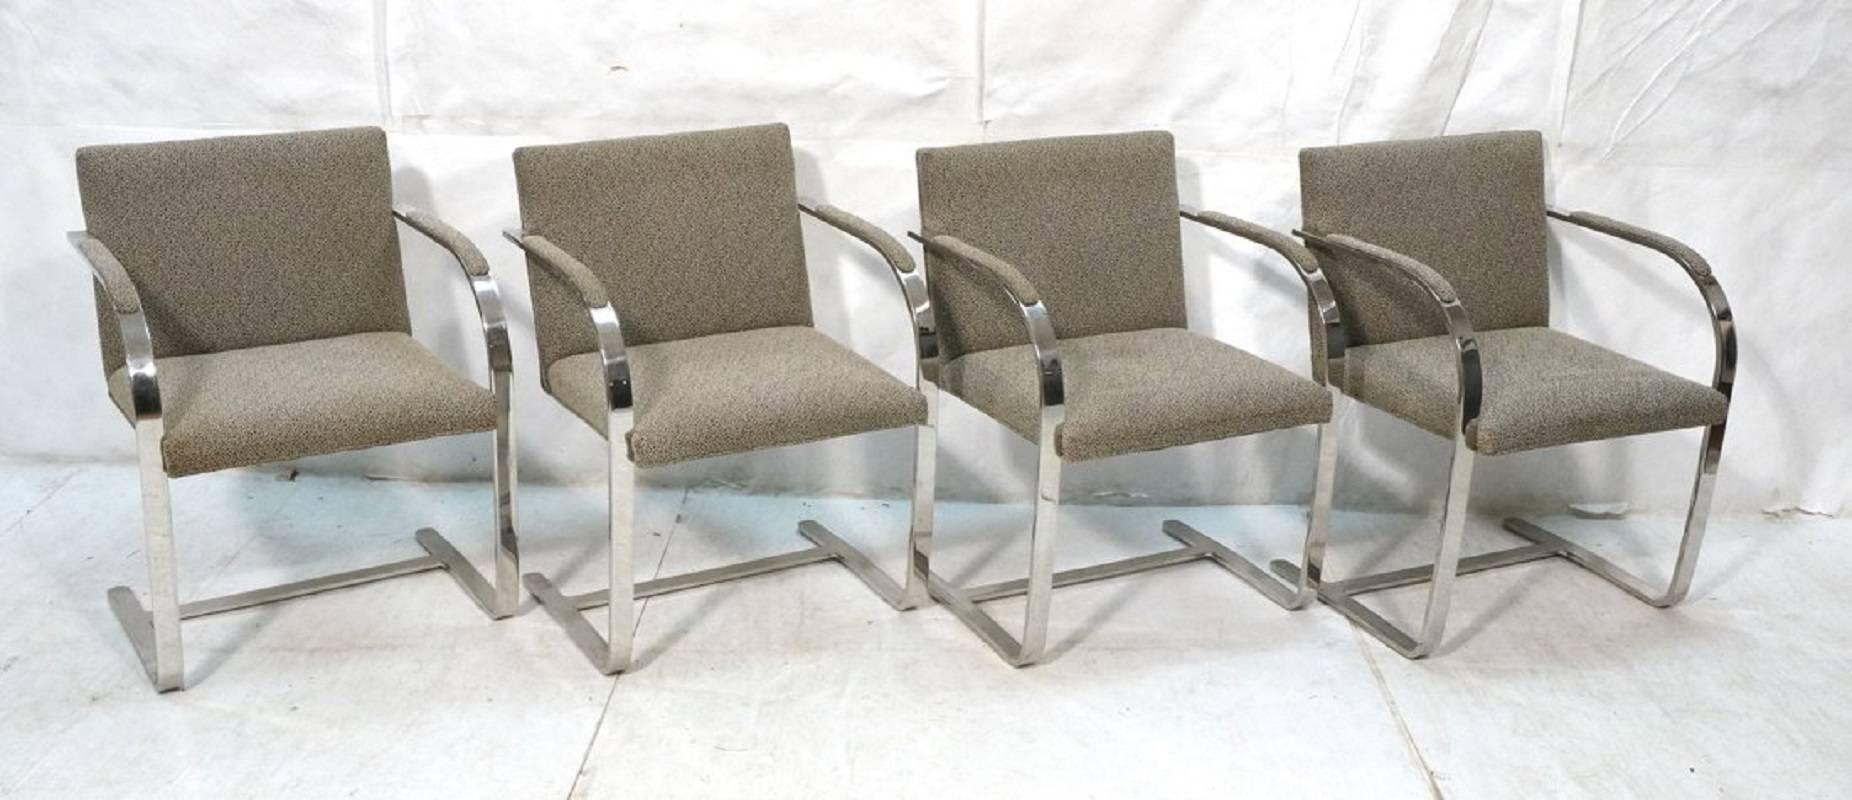 Set of four flat bar chrome cantilever chairs, in the style of Mies van der Rohe's iconic Brno chairs. This set with chrome back bar, attributed to Brueton, circa 1970s.

Measures: 33 in H x 22.5 in W x 24.5 in D.